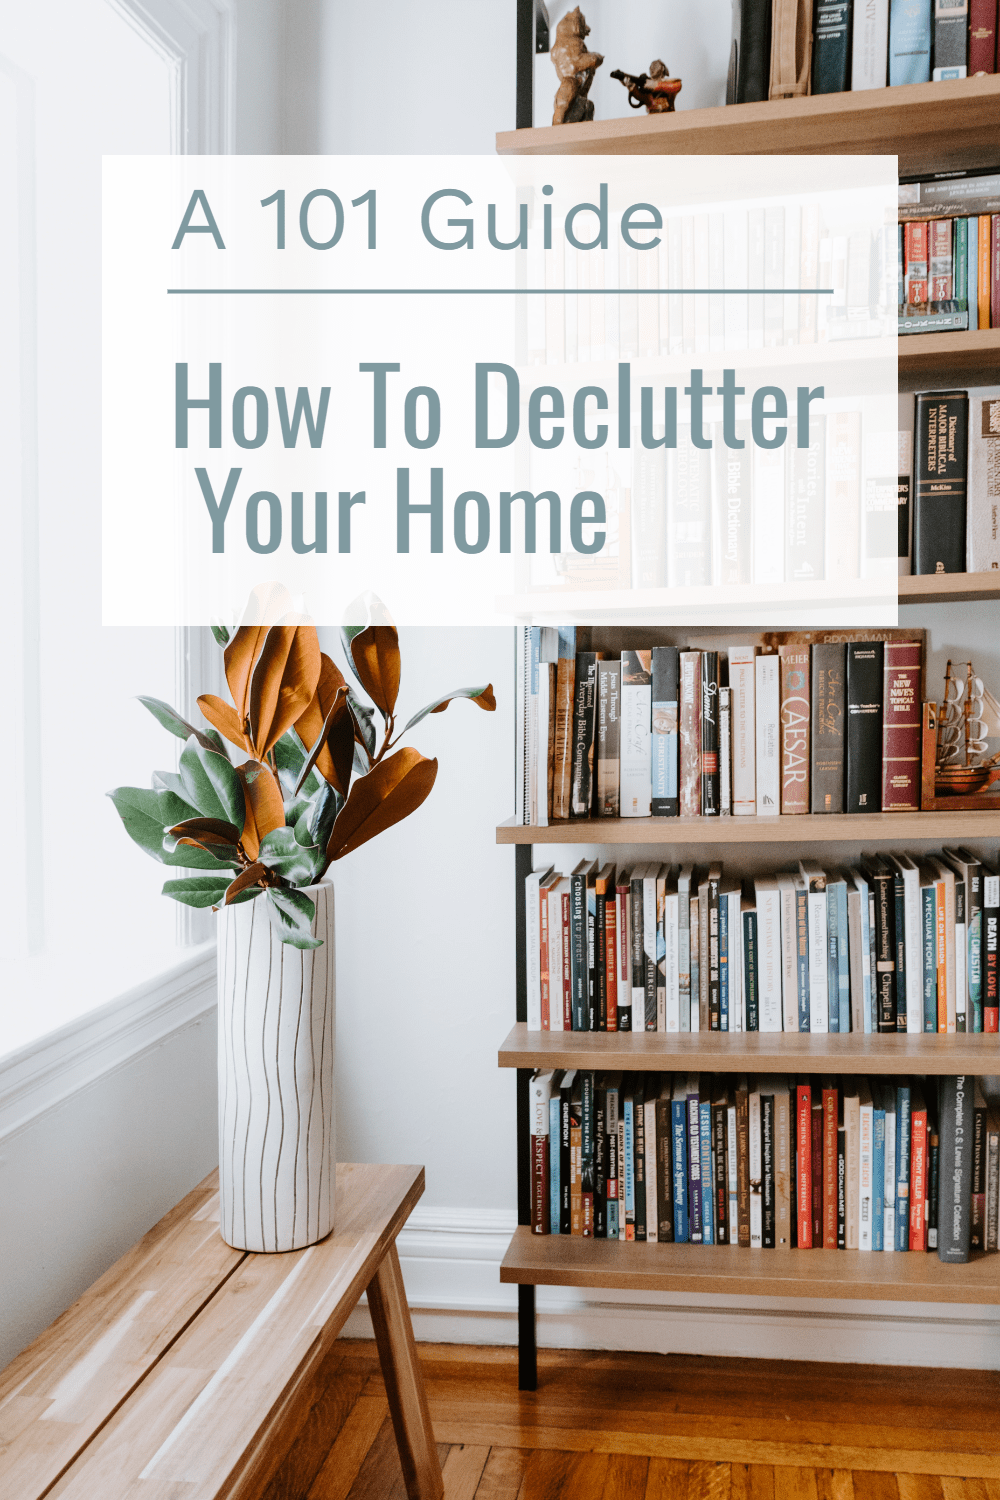 Declutter your home to a clean & tidy reading space